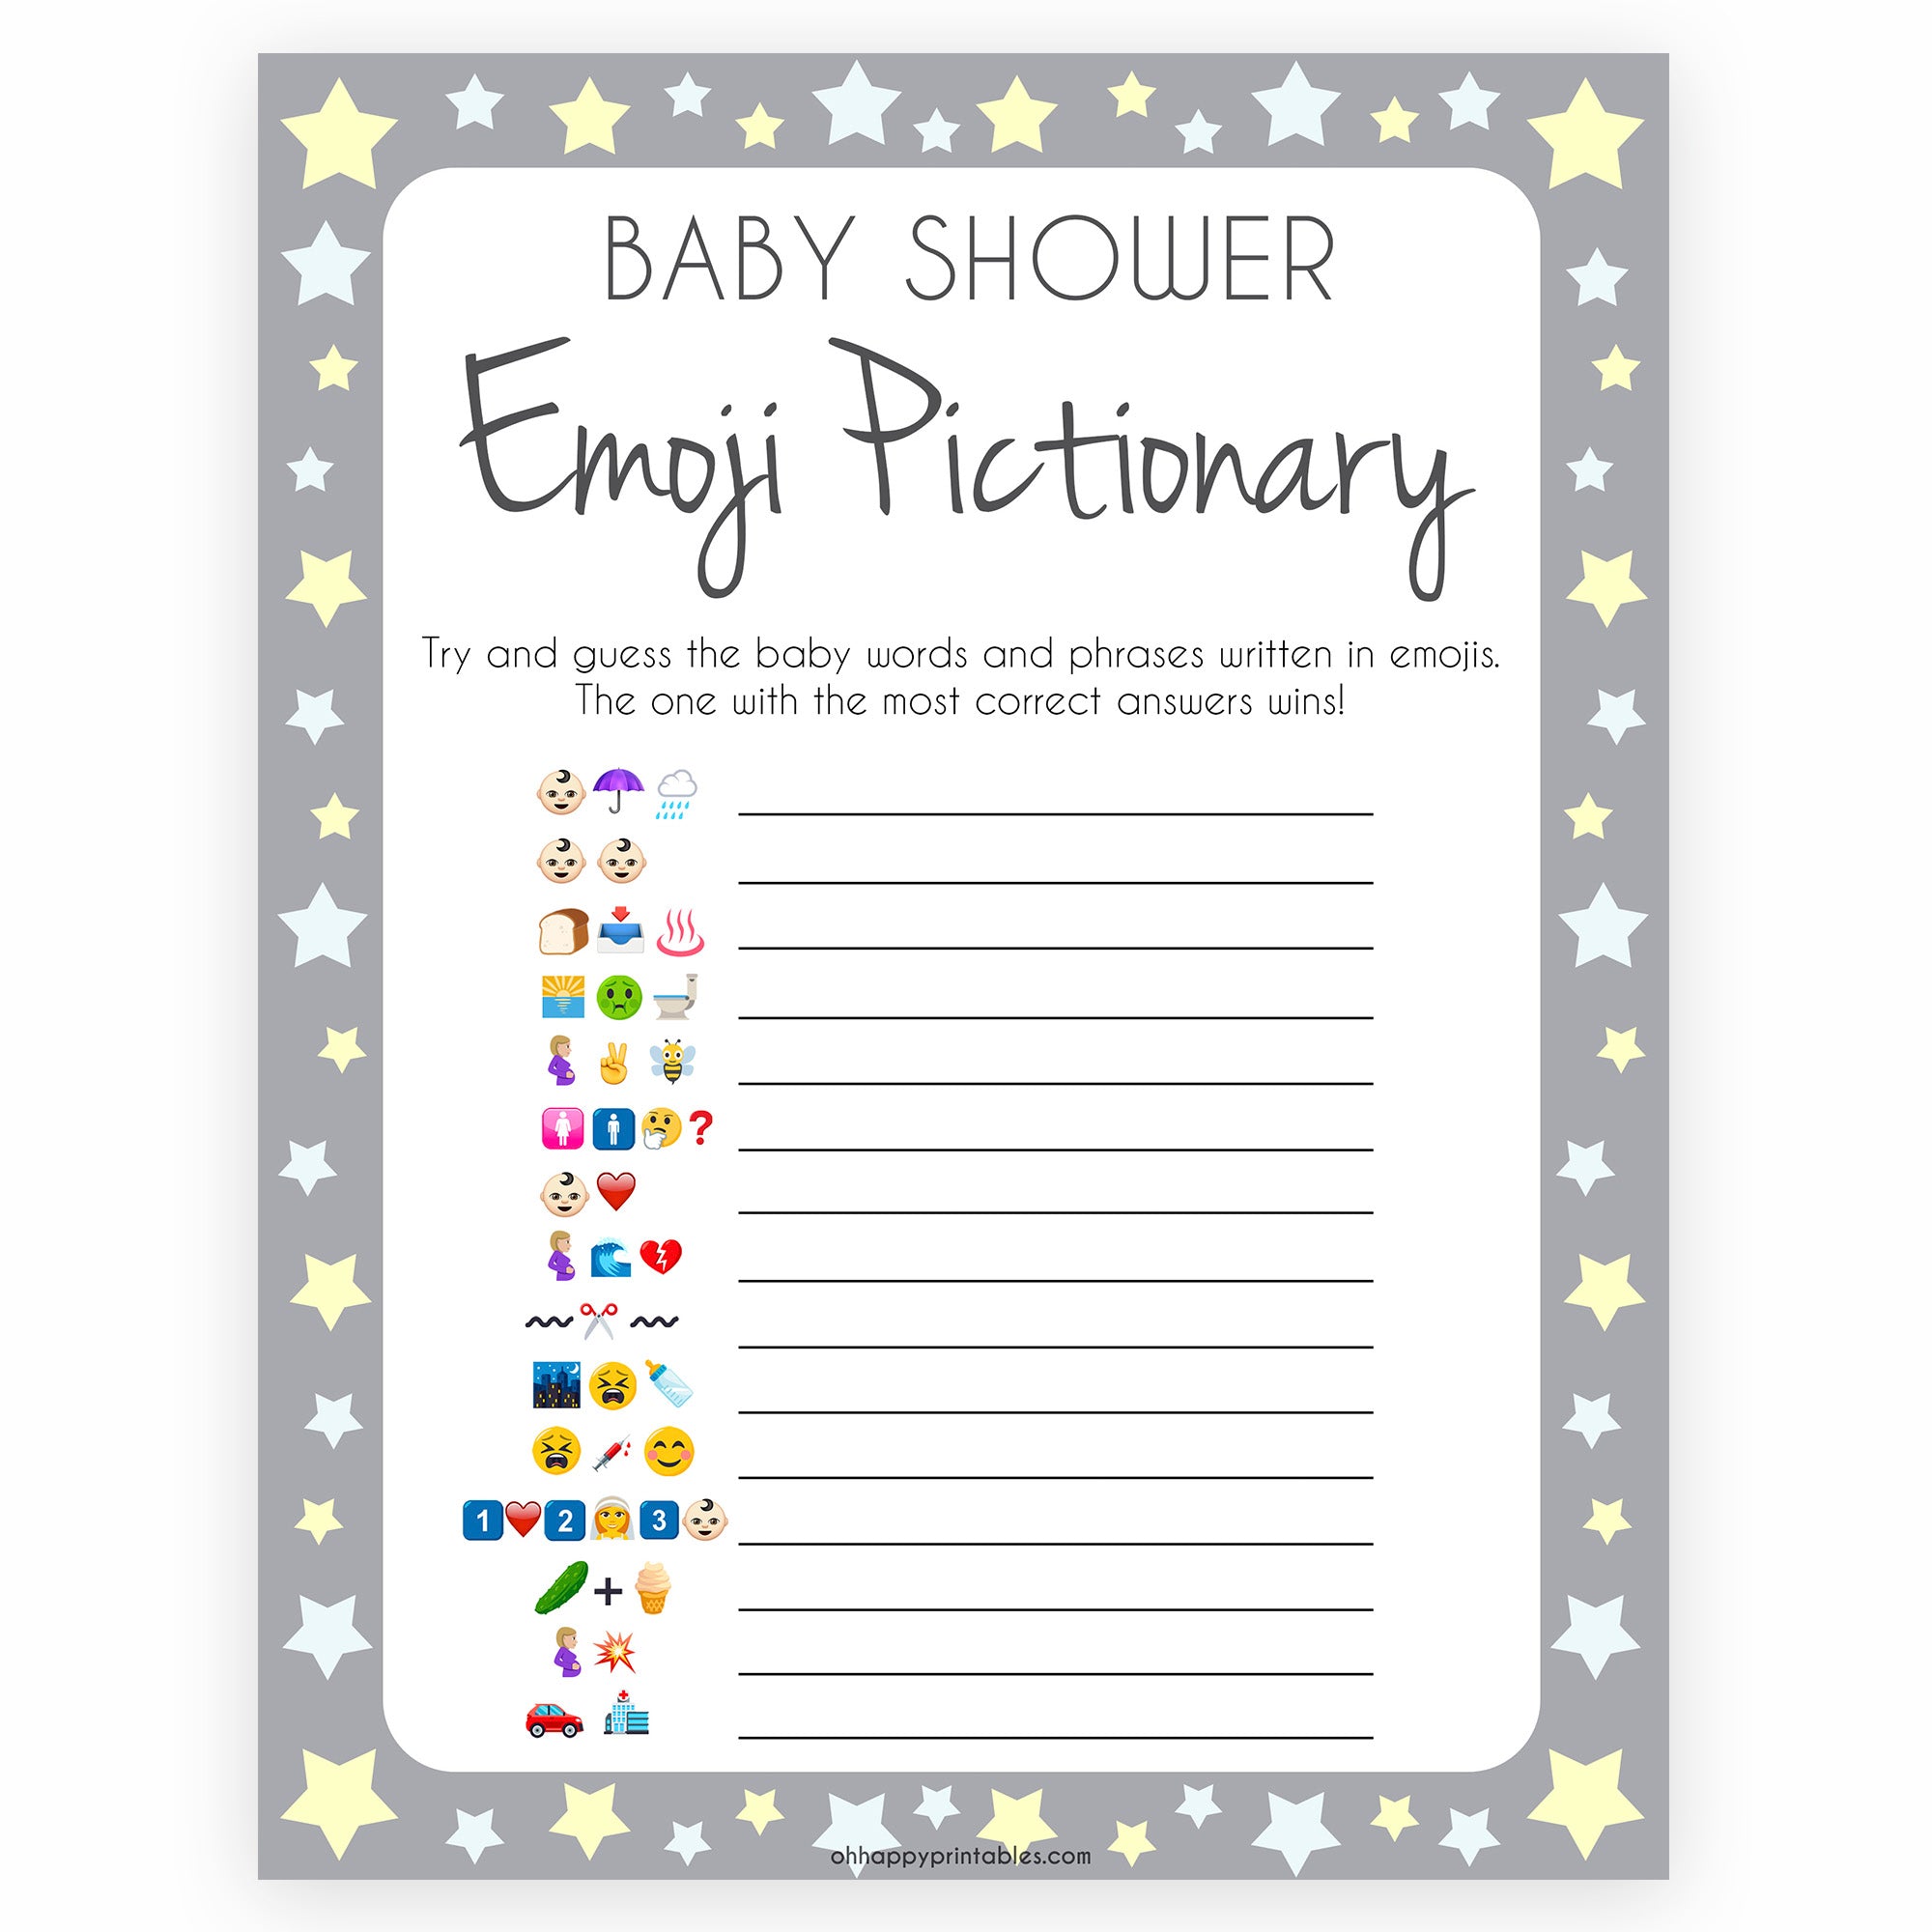 emoji-baby-shower-pictionary-game-printable-answers